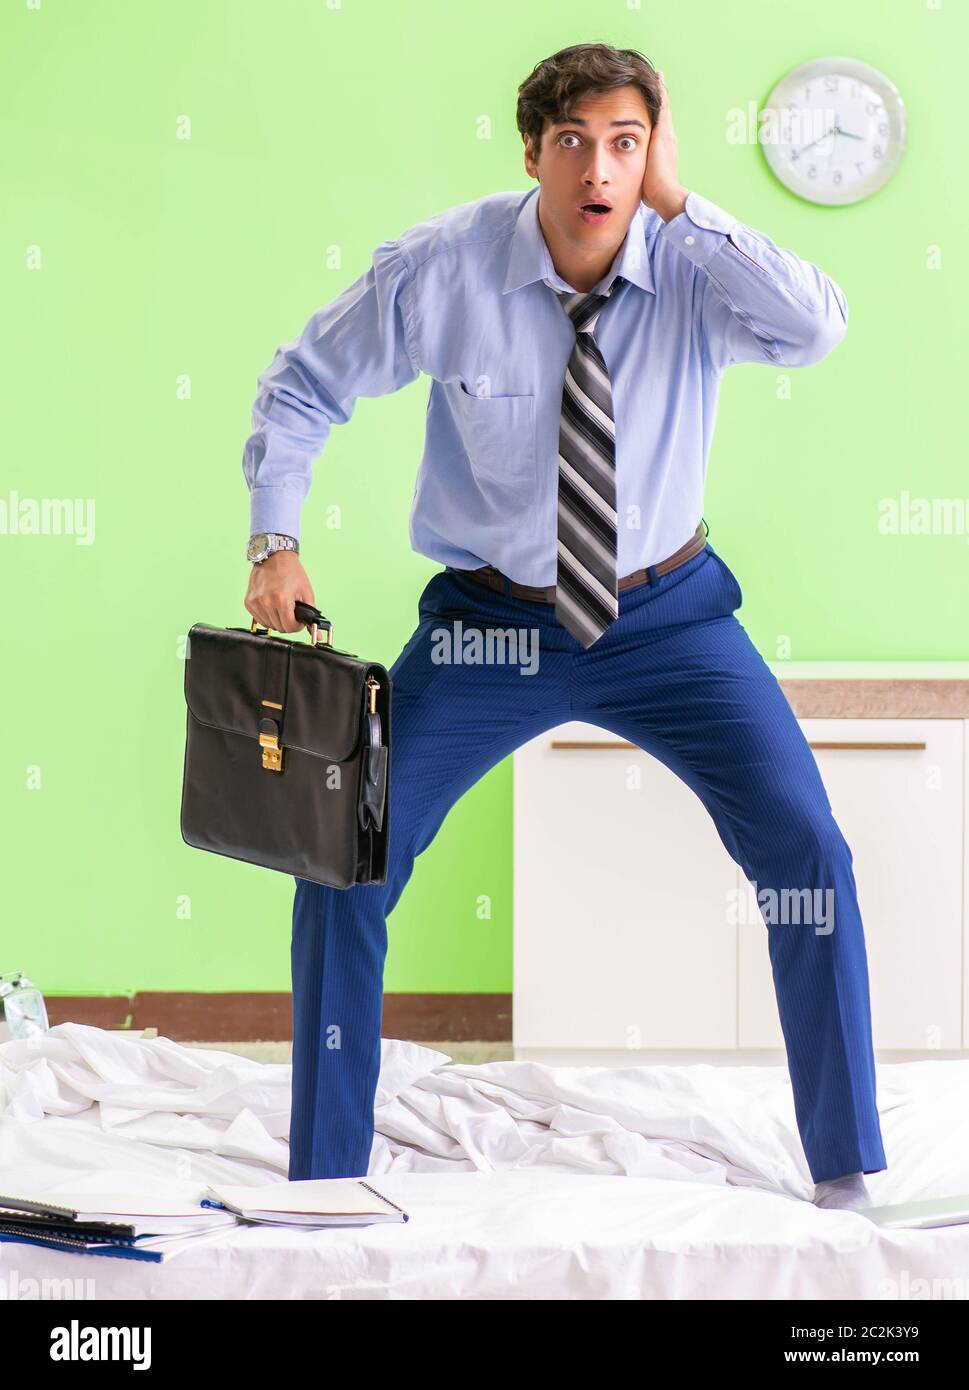 The young businessman employee late for office Stock Photo